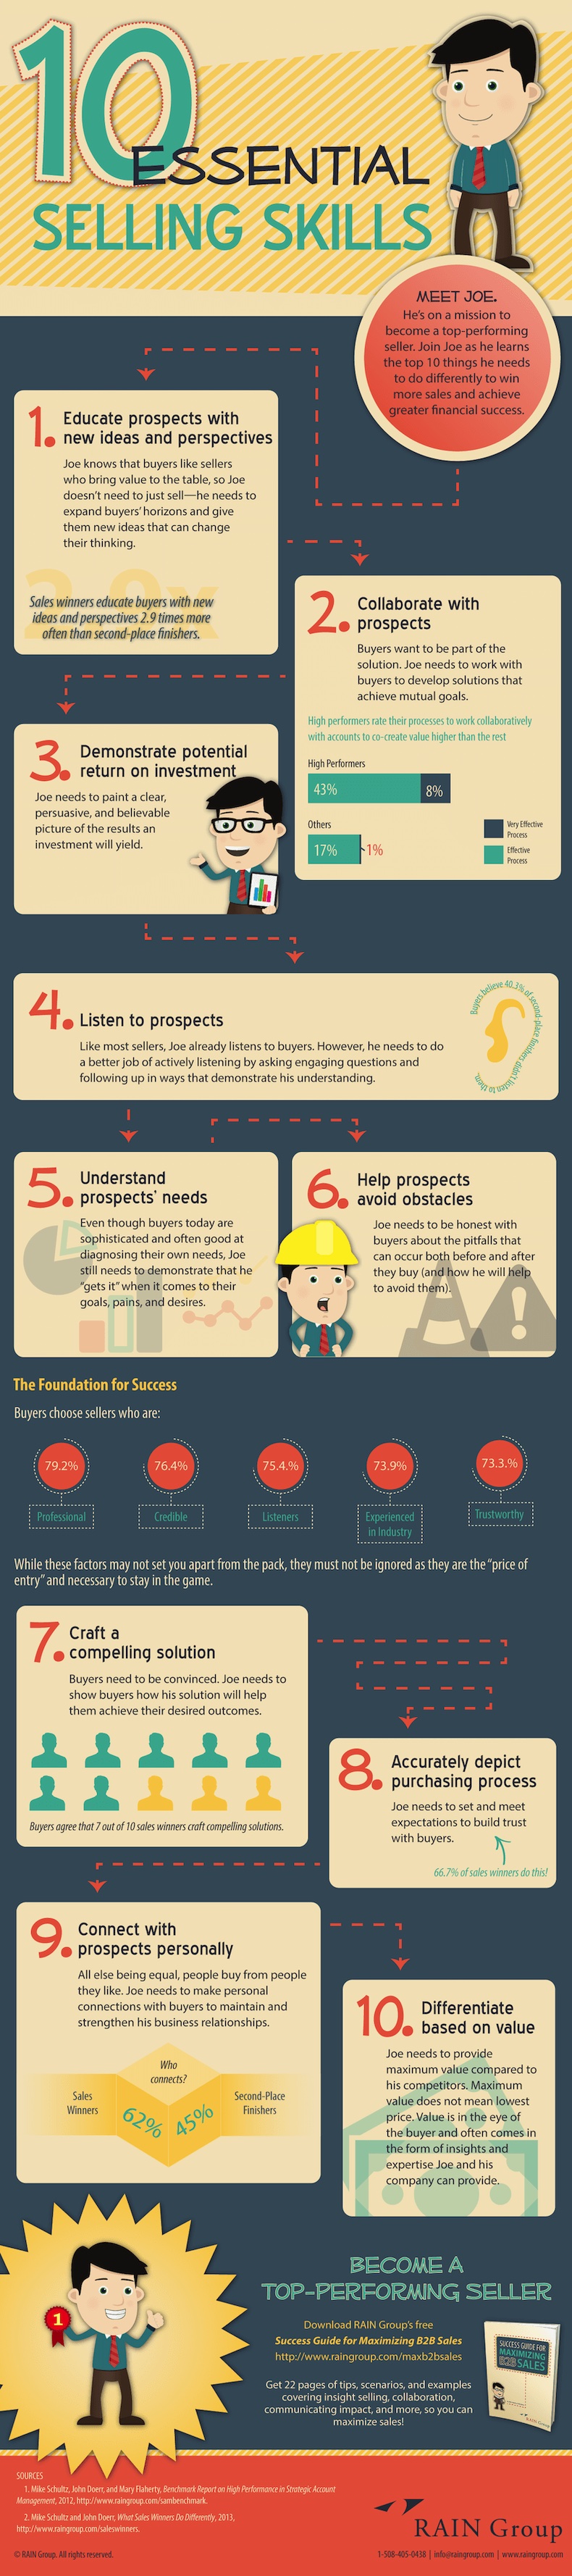 10 essential selling skills infographic